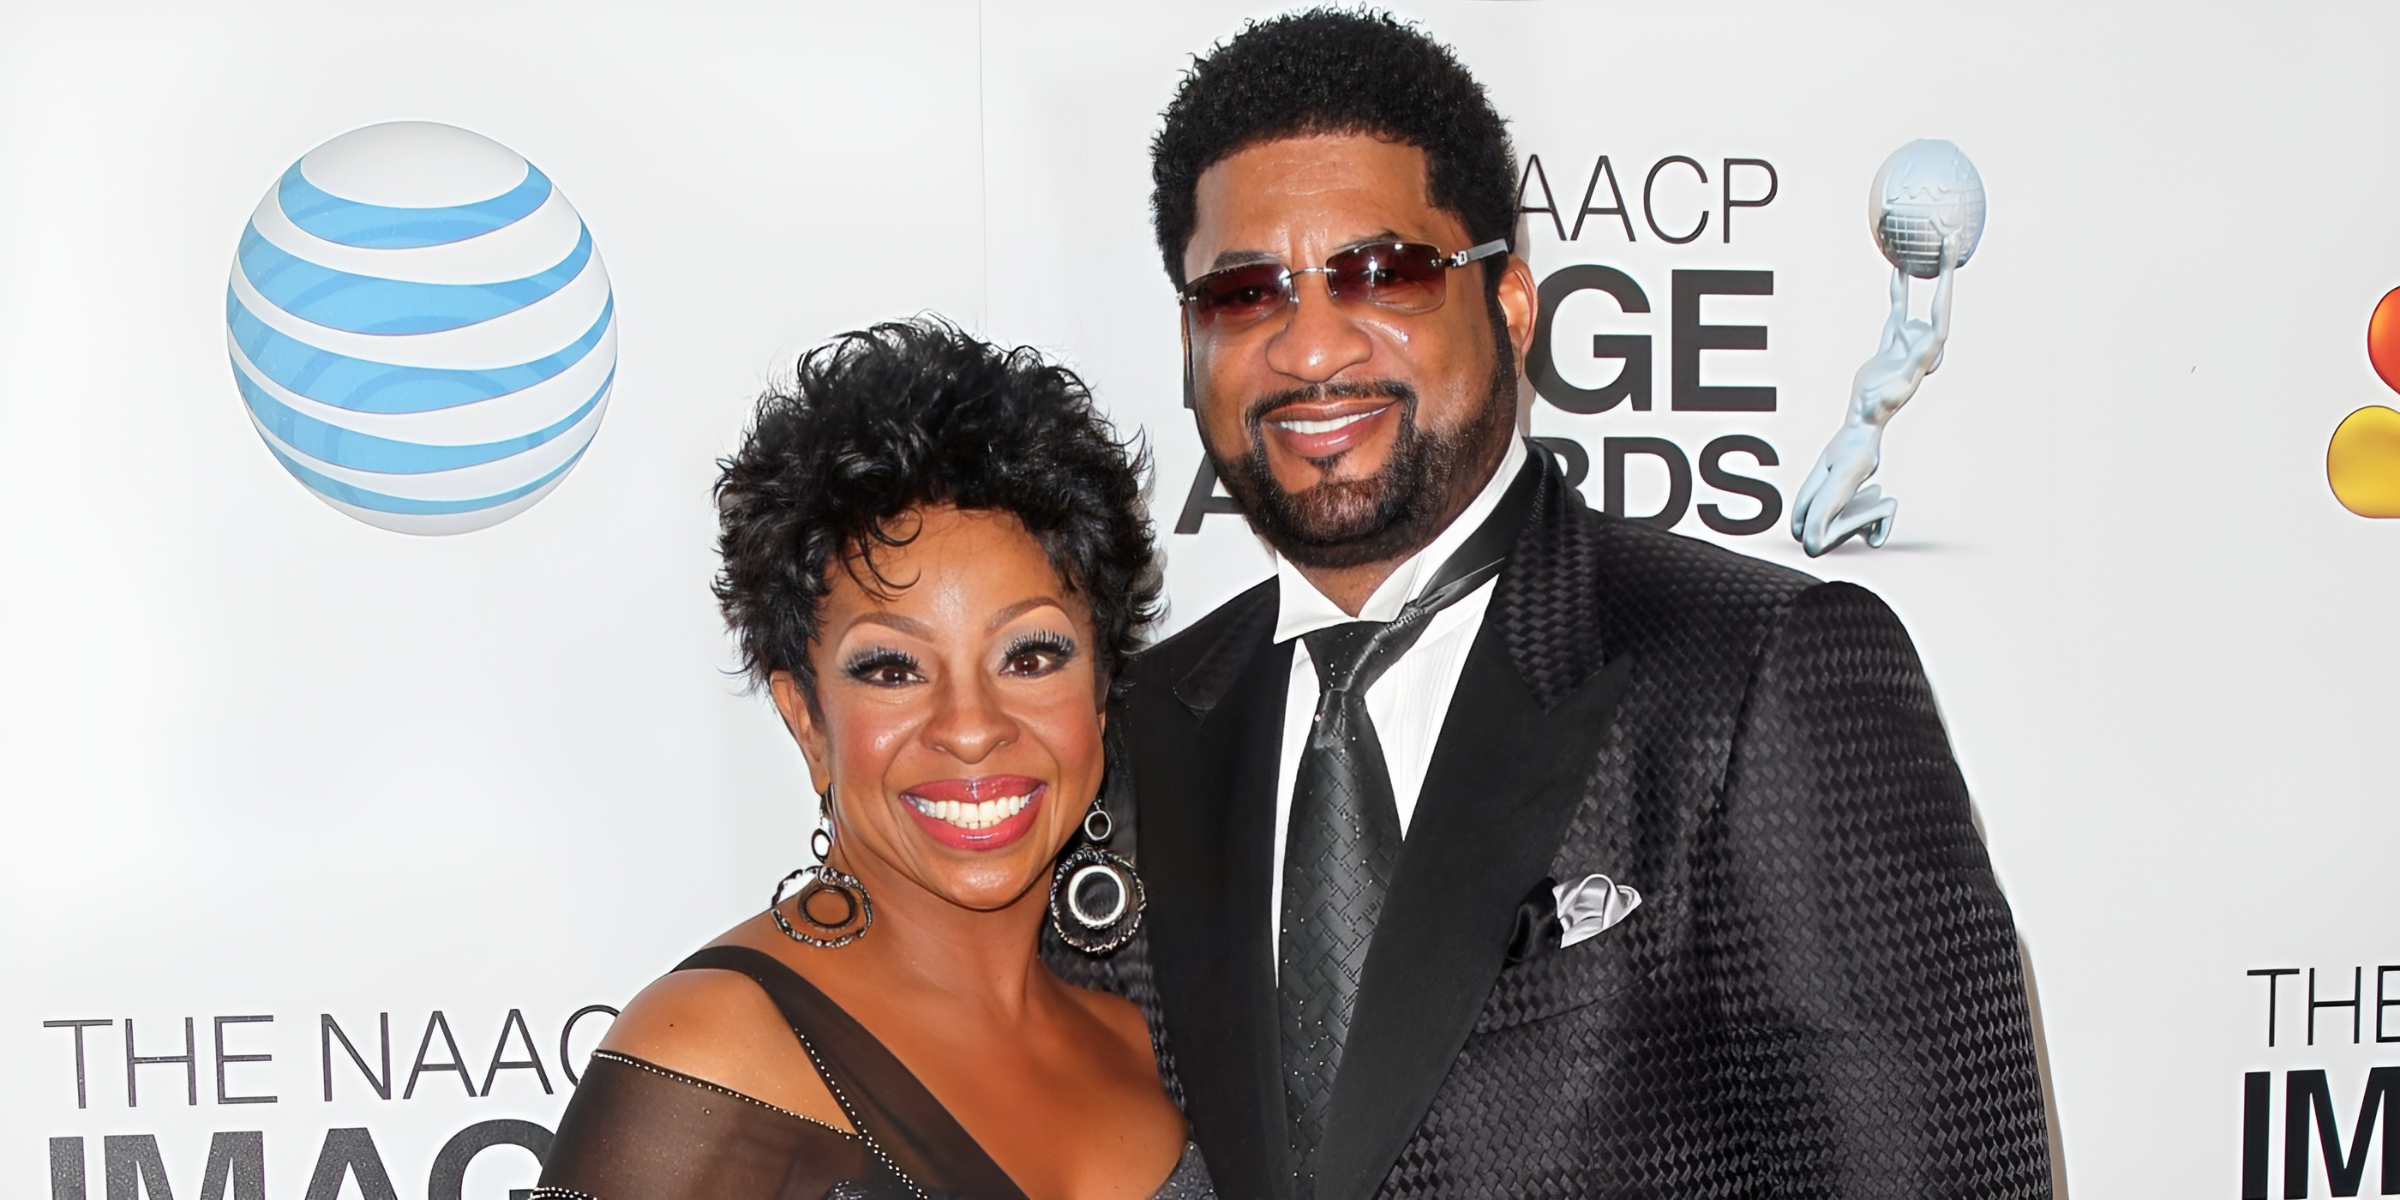 Gladys Knight and William McDowell, 2013 | Source: Getty Images